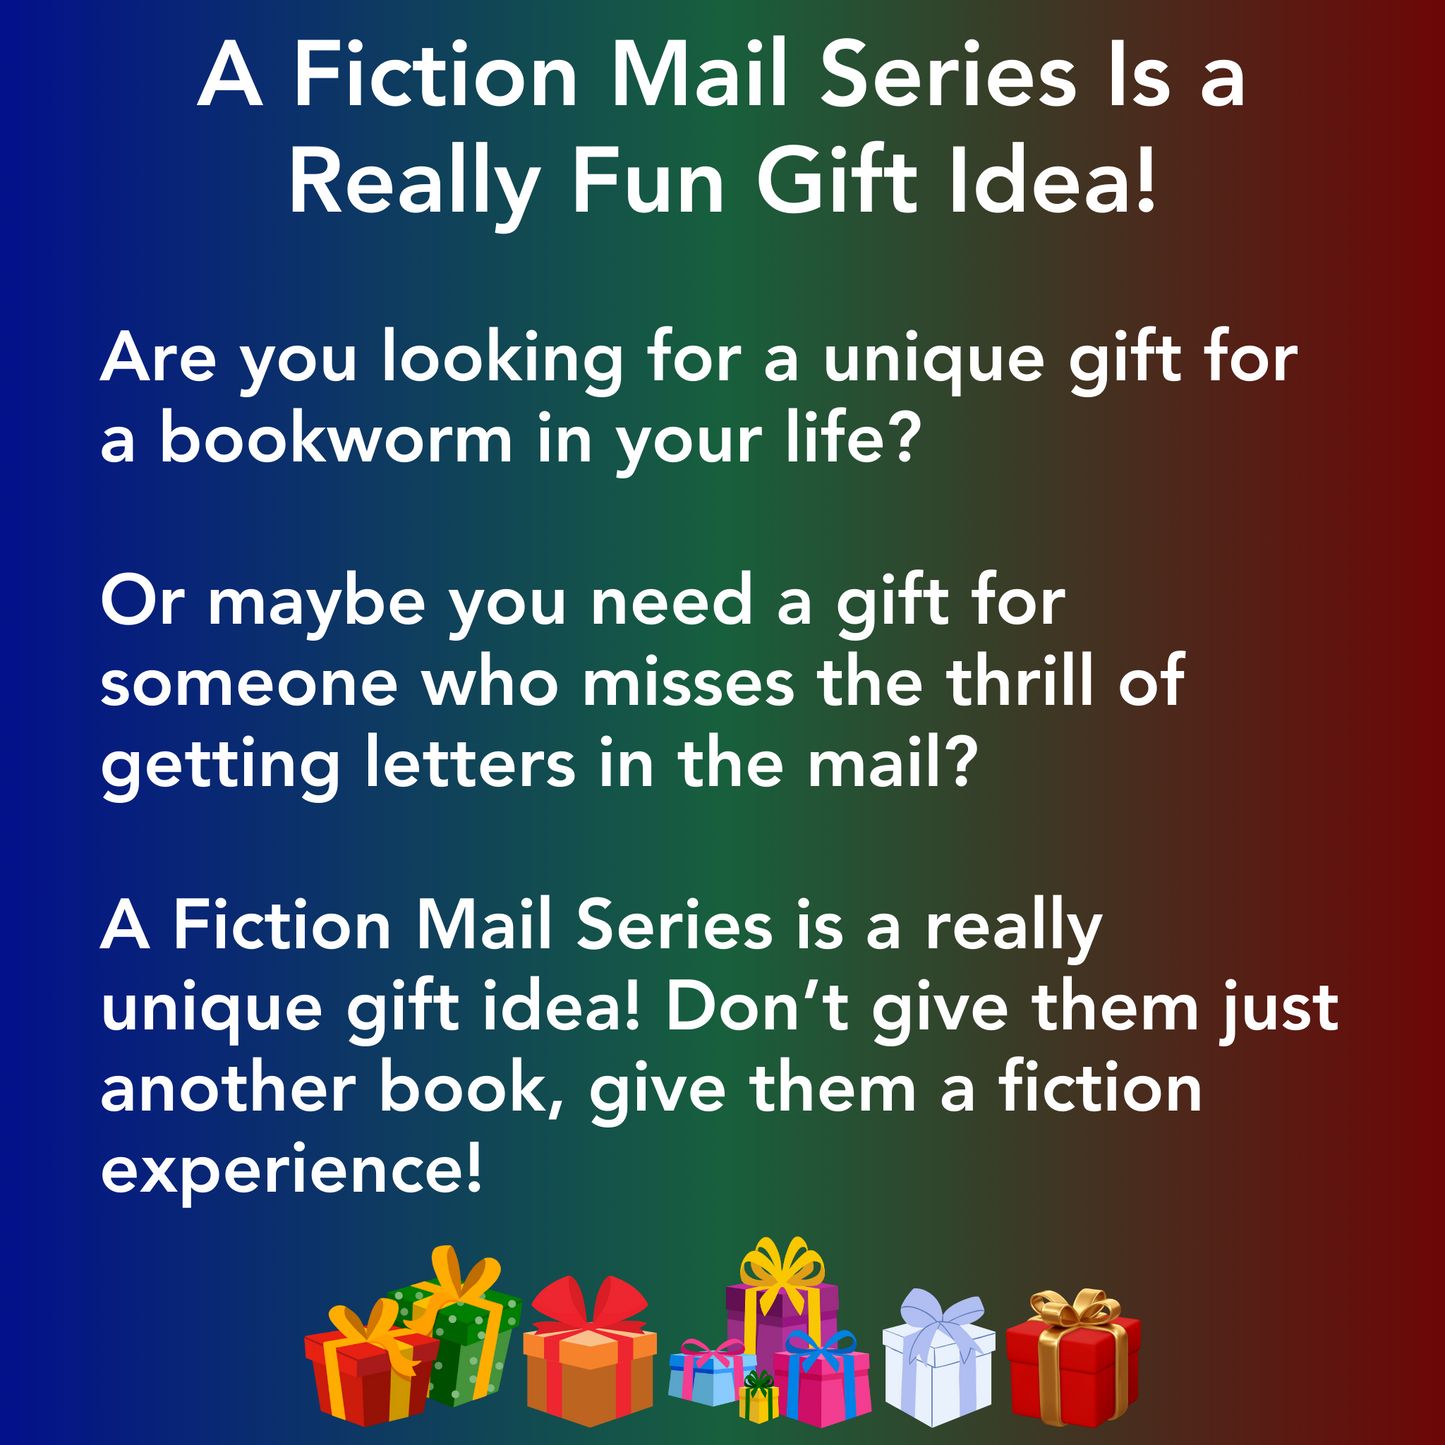 What makes Fiction Mail such a unique reading experience?